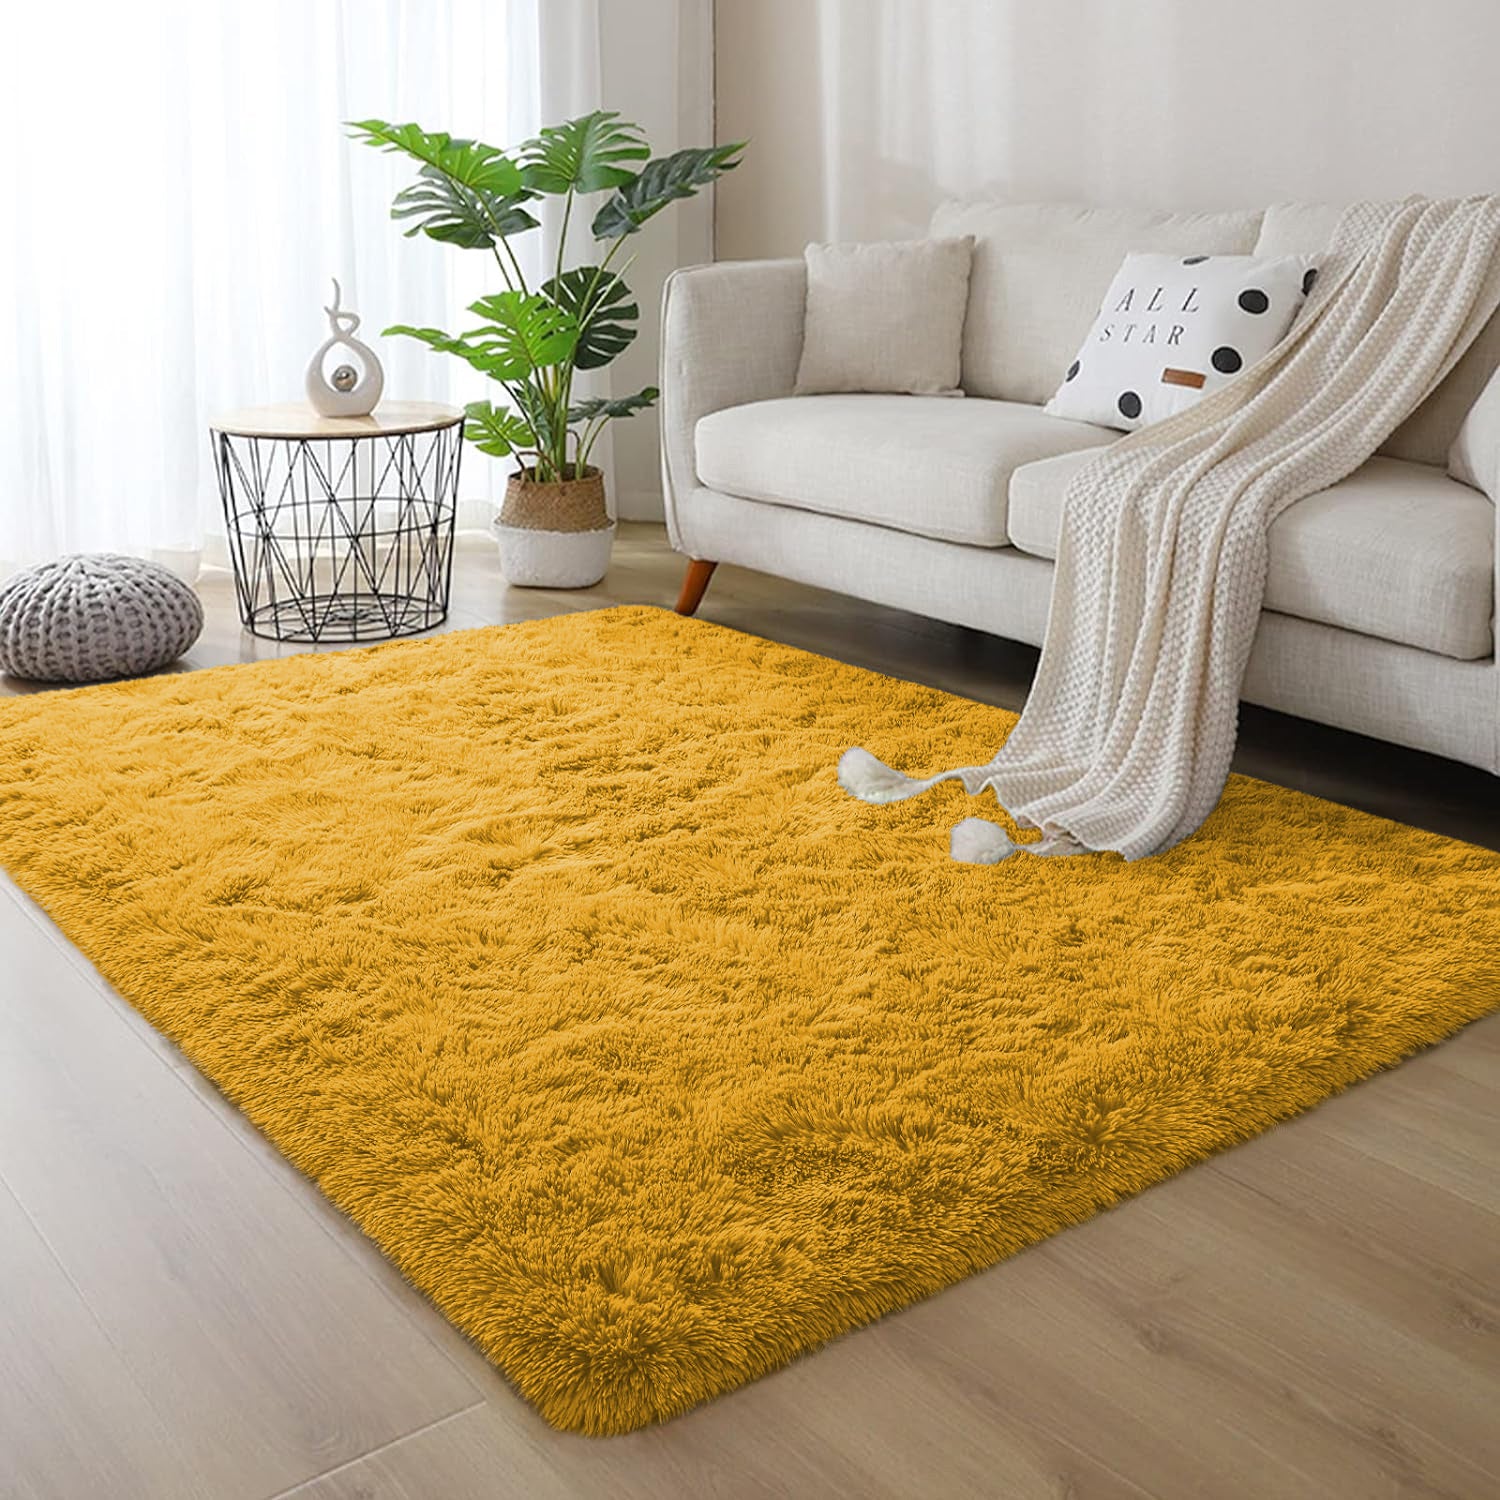 Faux Fur Soft Fluffy Large Shaggy Rugs